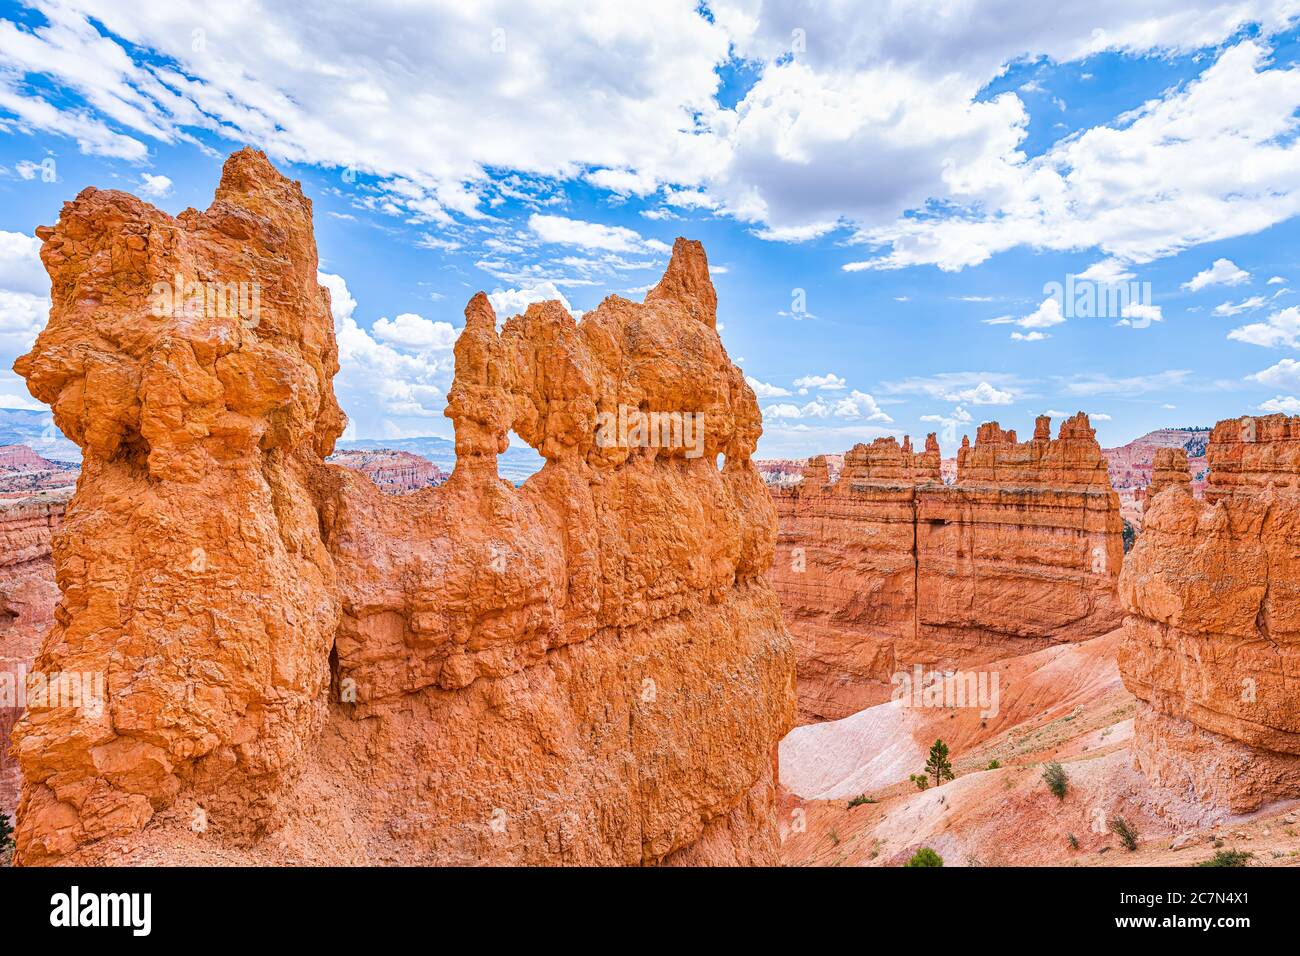 High angle above aerial view of hoodoos orange rock formations at Bryce Canyon National Park in Utah Queens Garden Navajo Loop trail Stock Photo